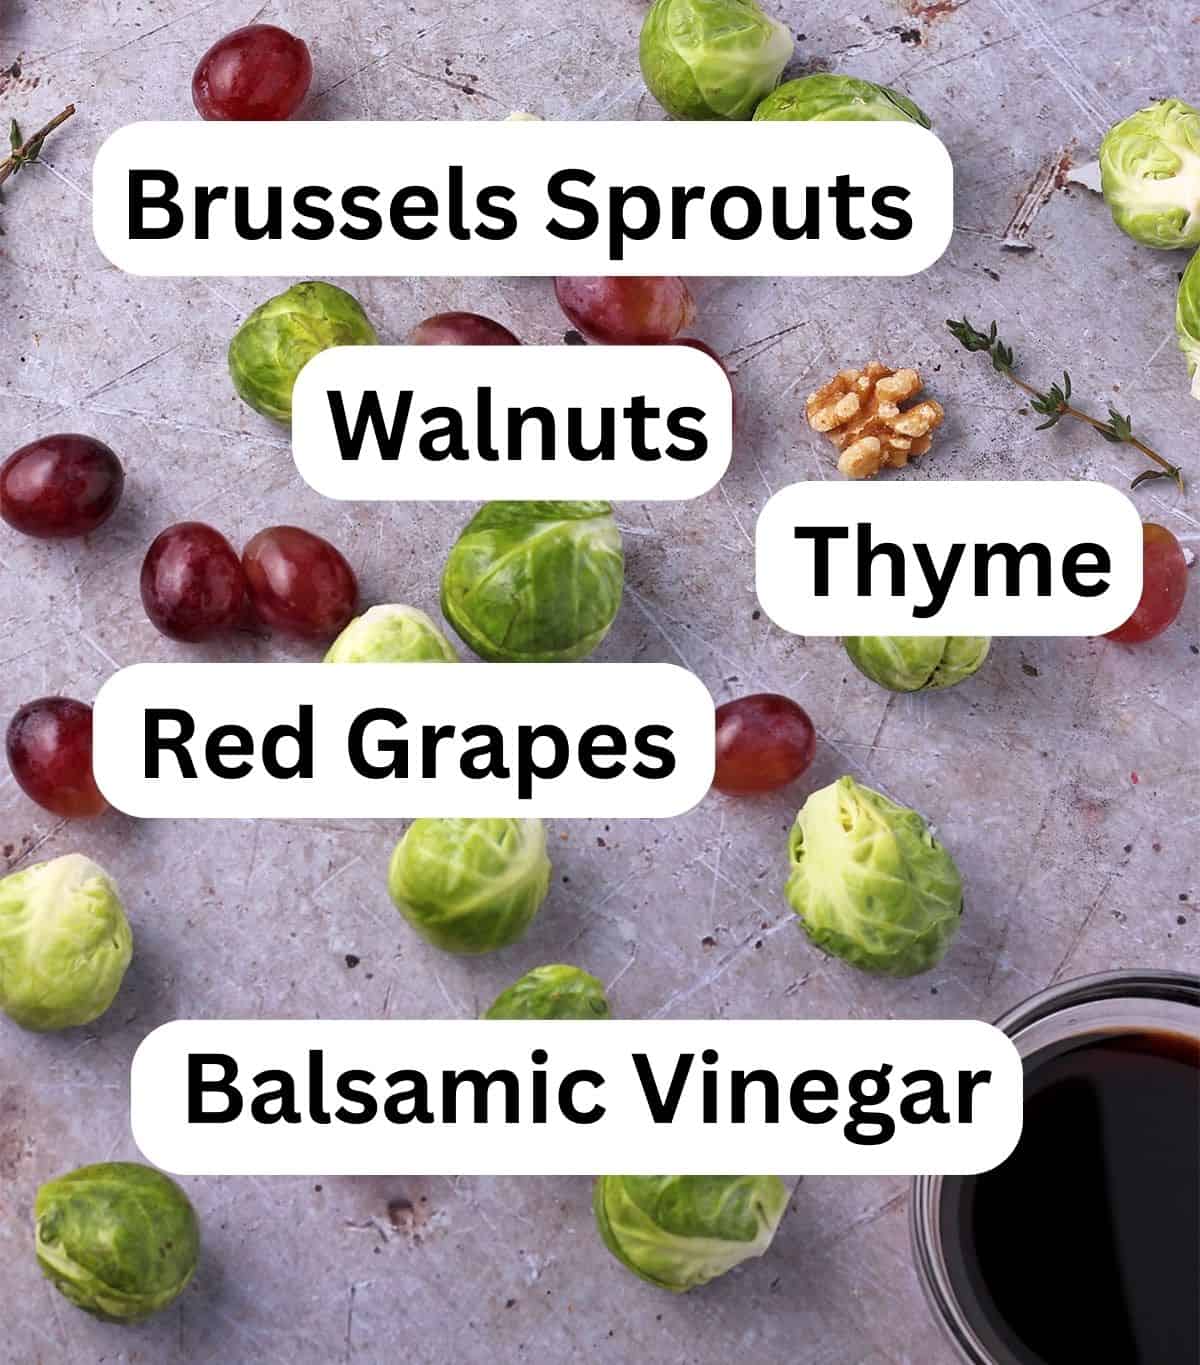 Brussels sprouts, red grapes, a dish of balsamic vinegar, a walnut, and thyme sprig with labels.